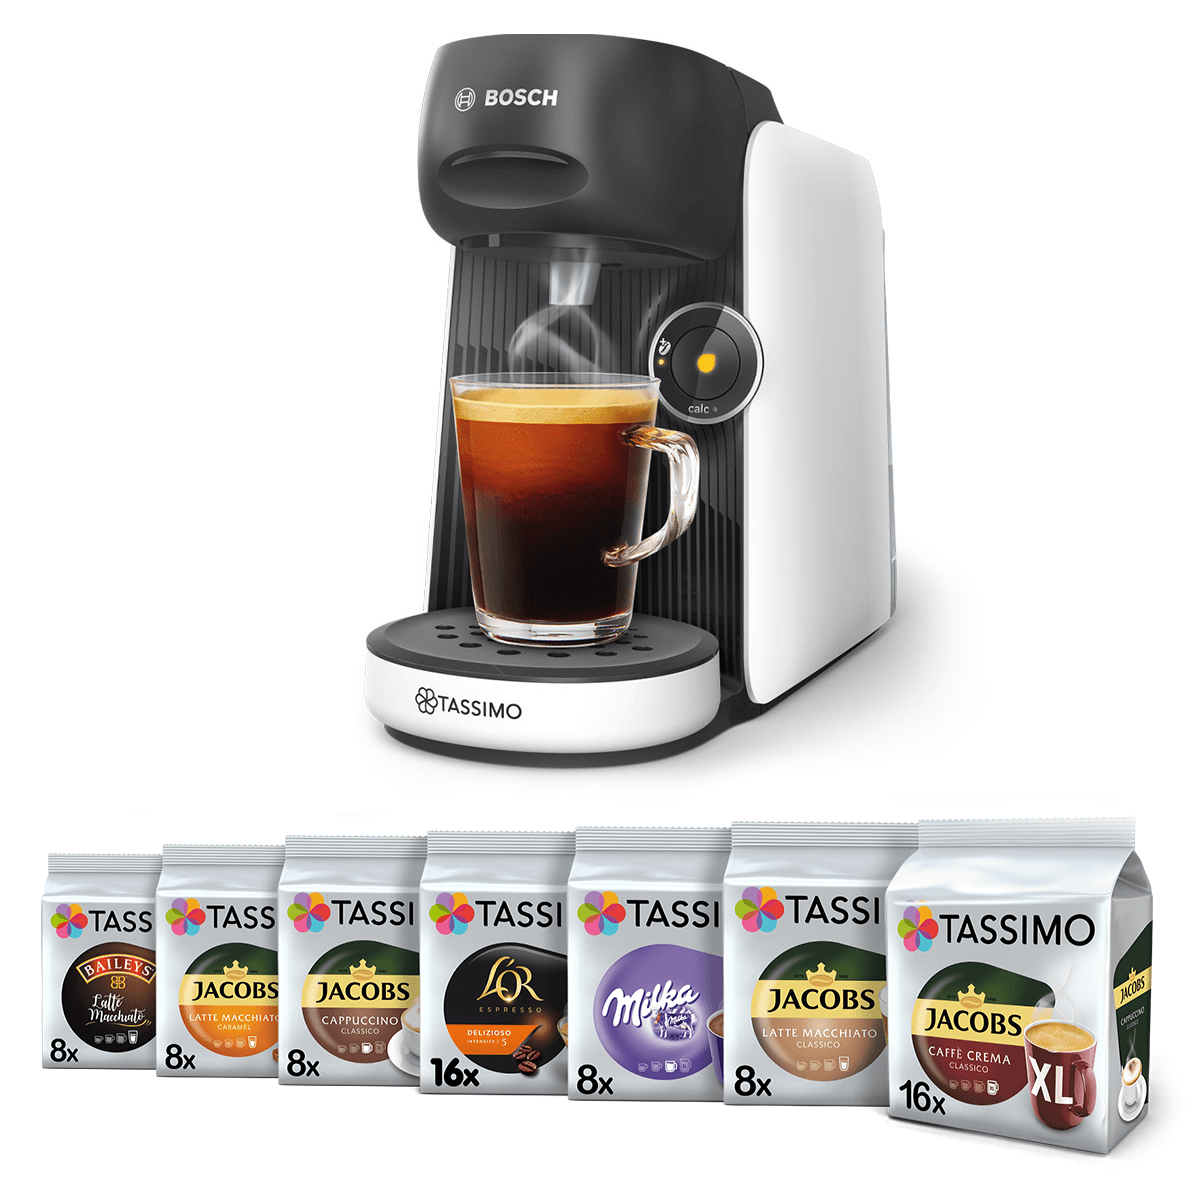 Tassimo_Finesse_Bialy_7_1200x1200_no_copy